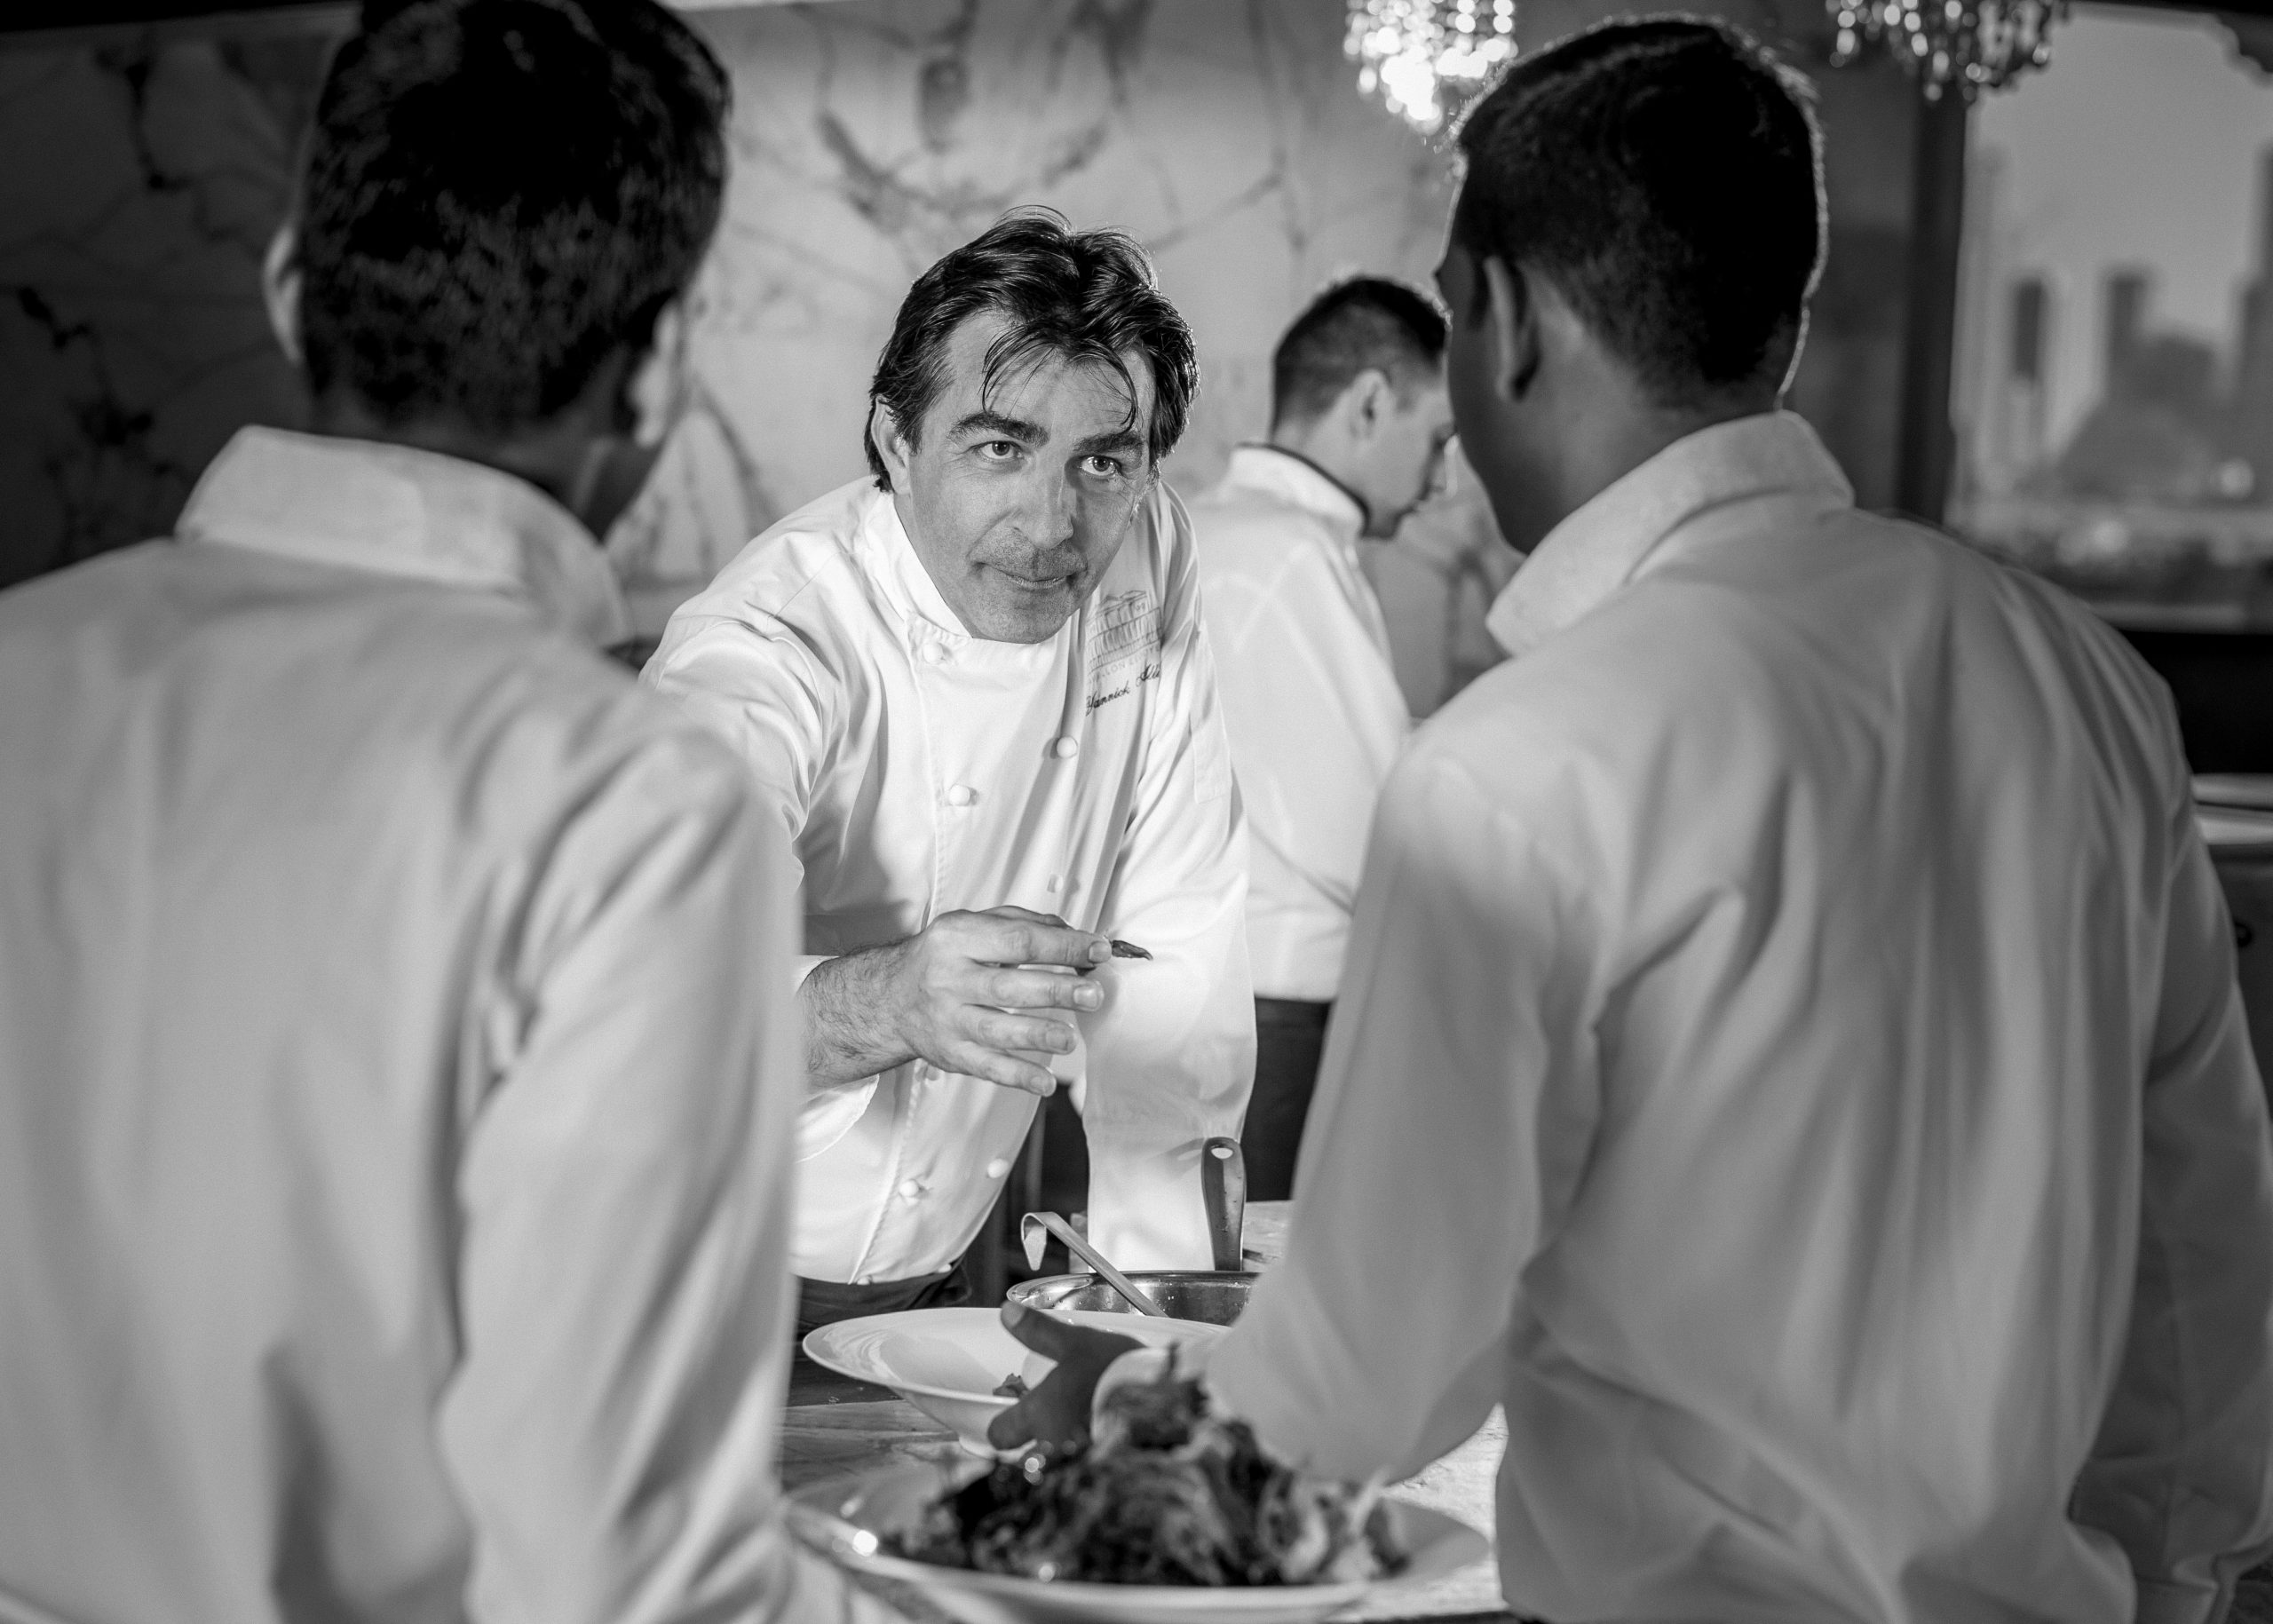 OO_ThePalm_FB_Chef_Yannick_Service_0424_MASTER_BW